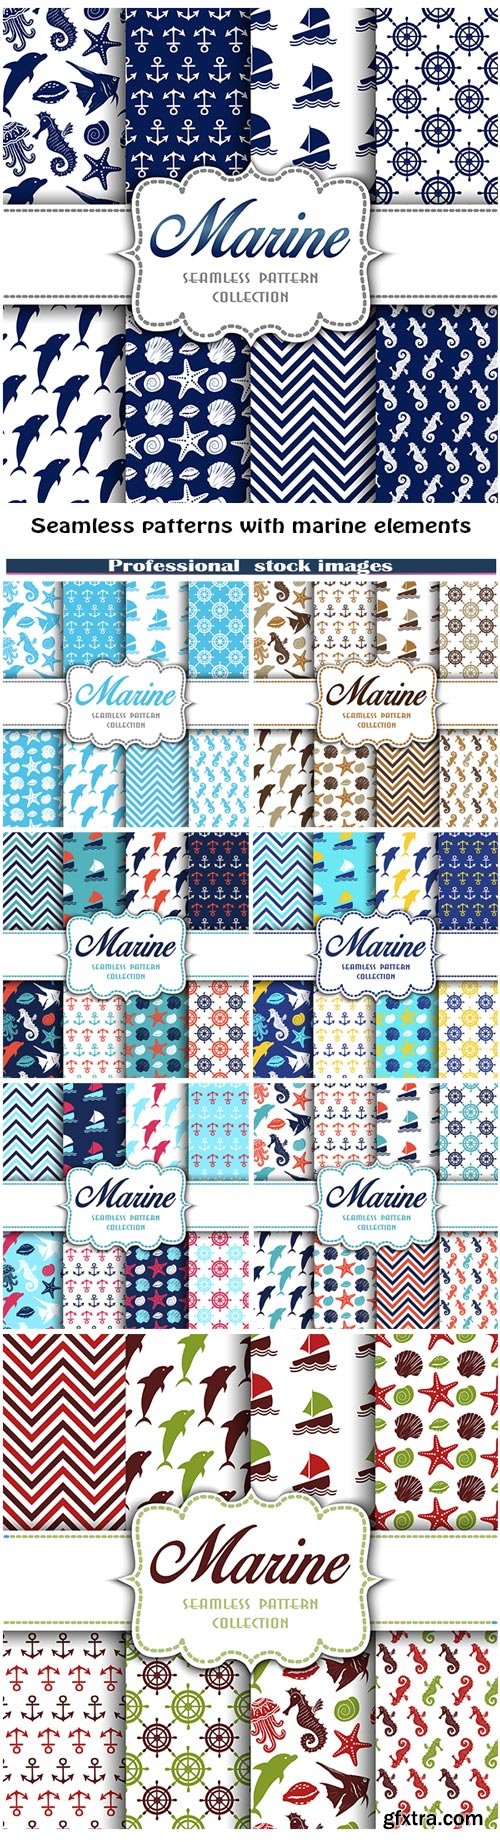 Seamless patterns with marine elements